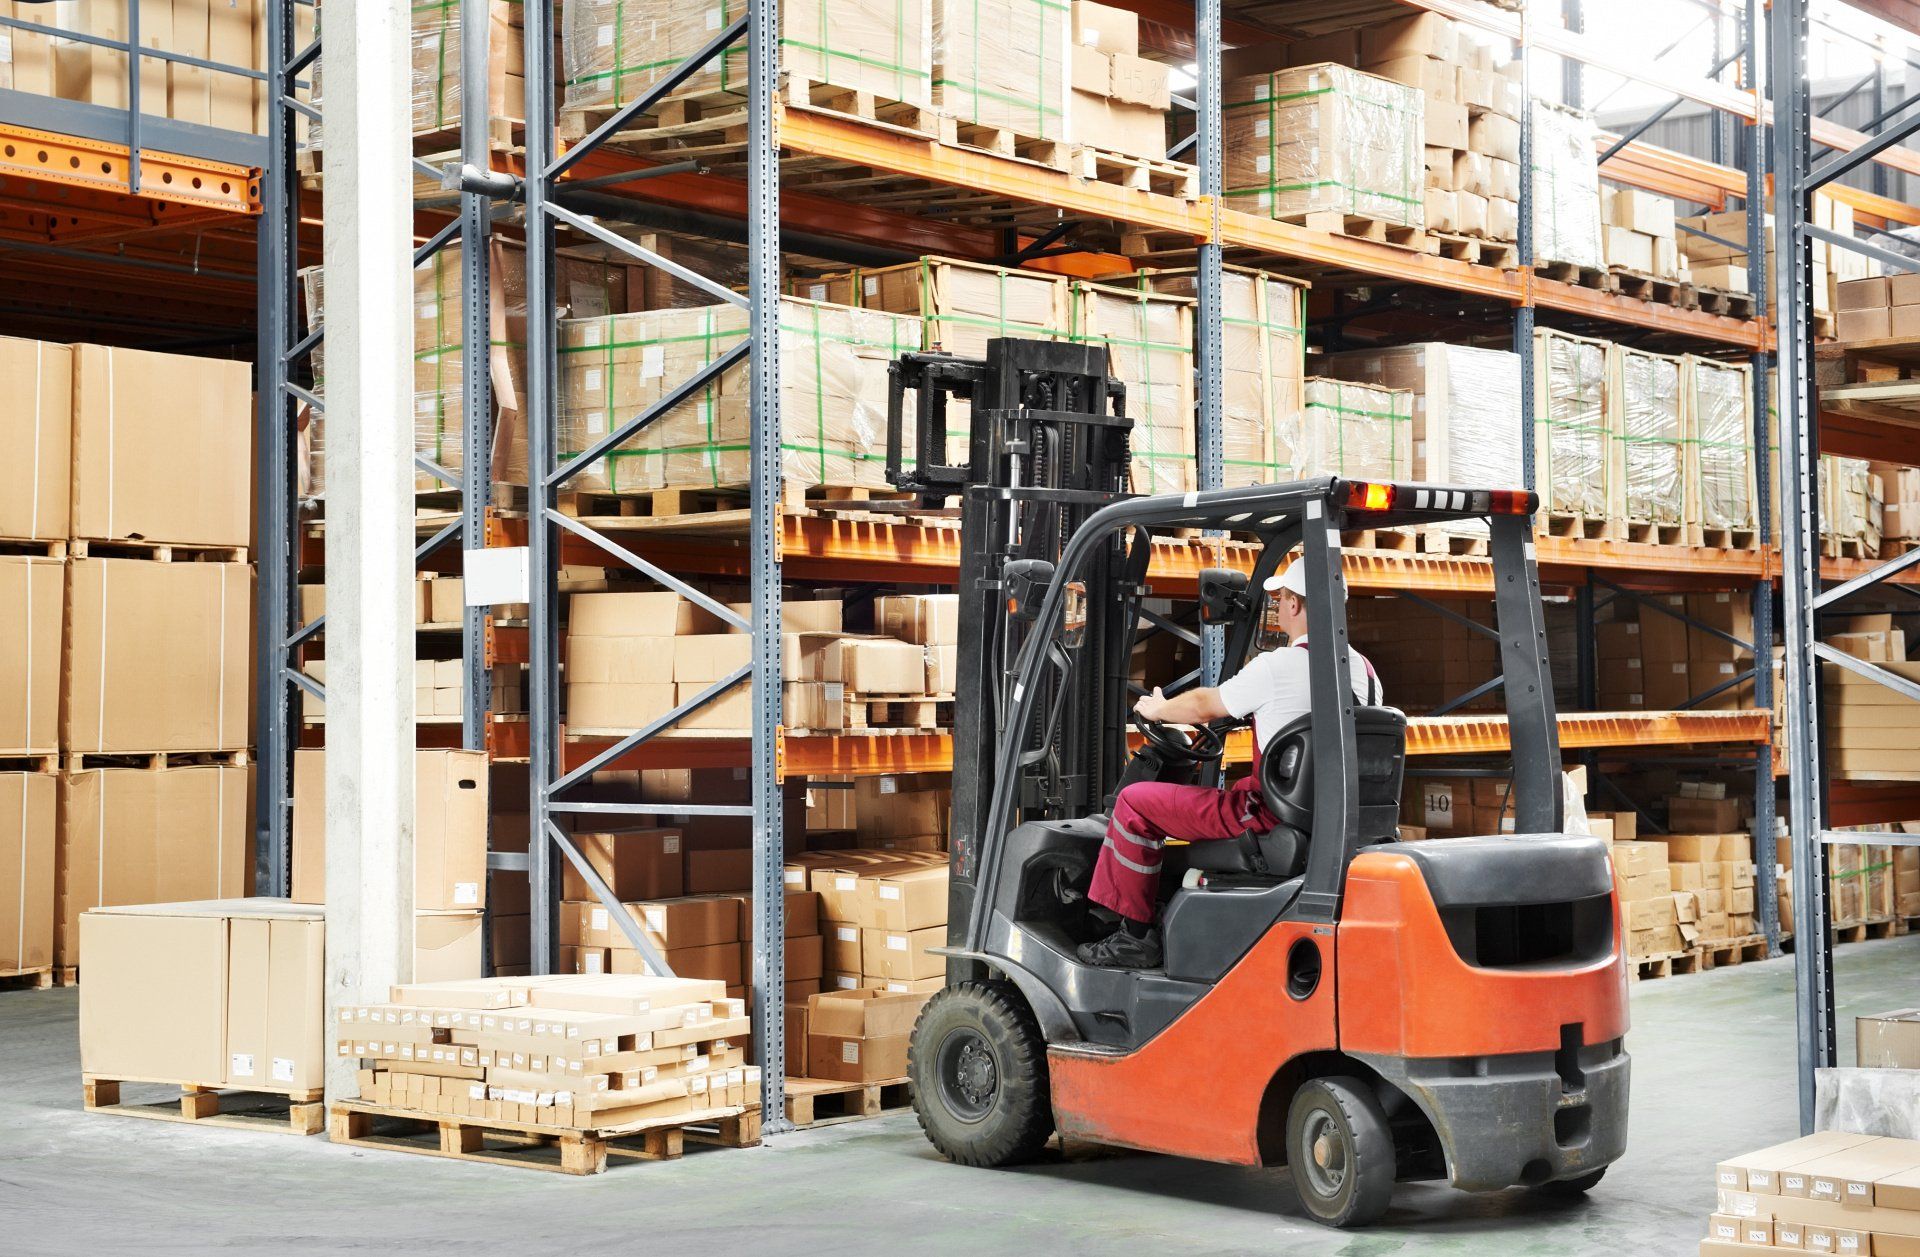 Forklift being operated as someone observes